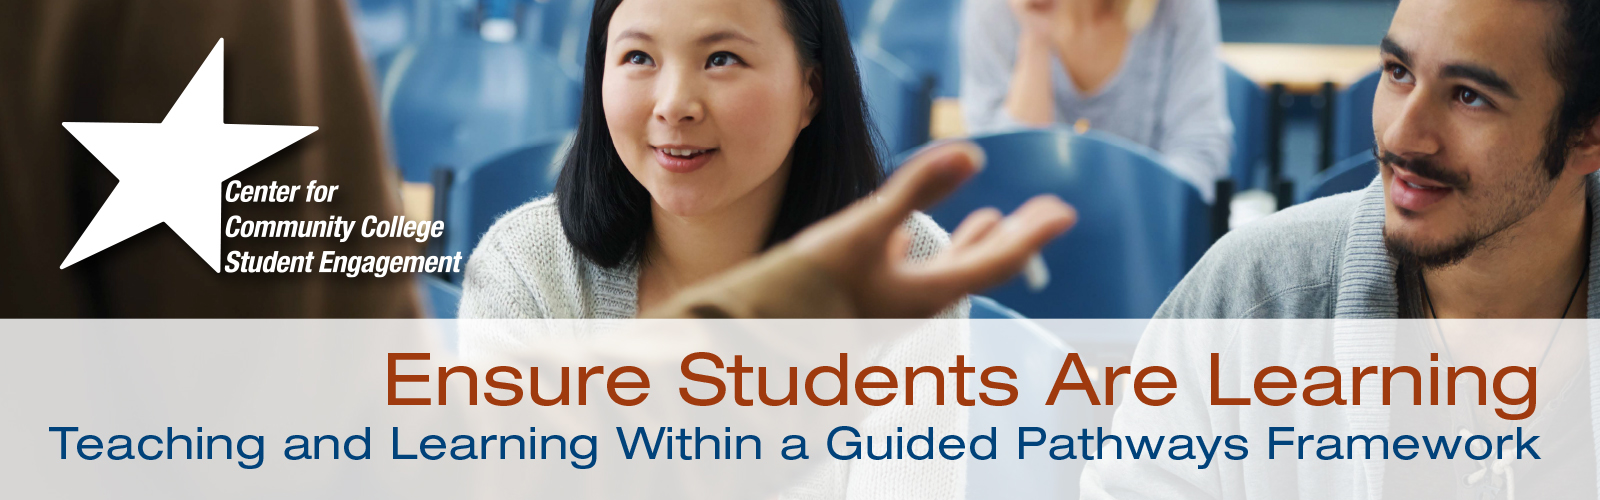 Teaching and Learning within Guided Pathways Banner